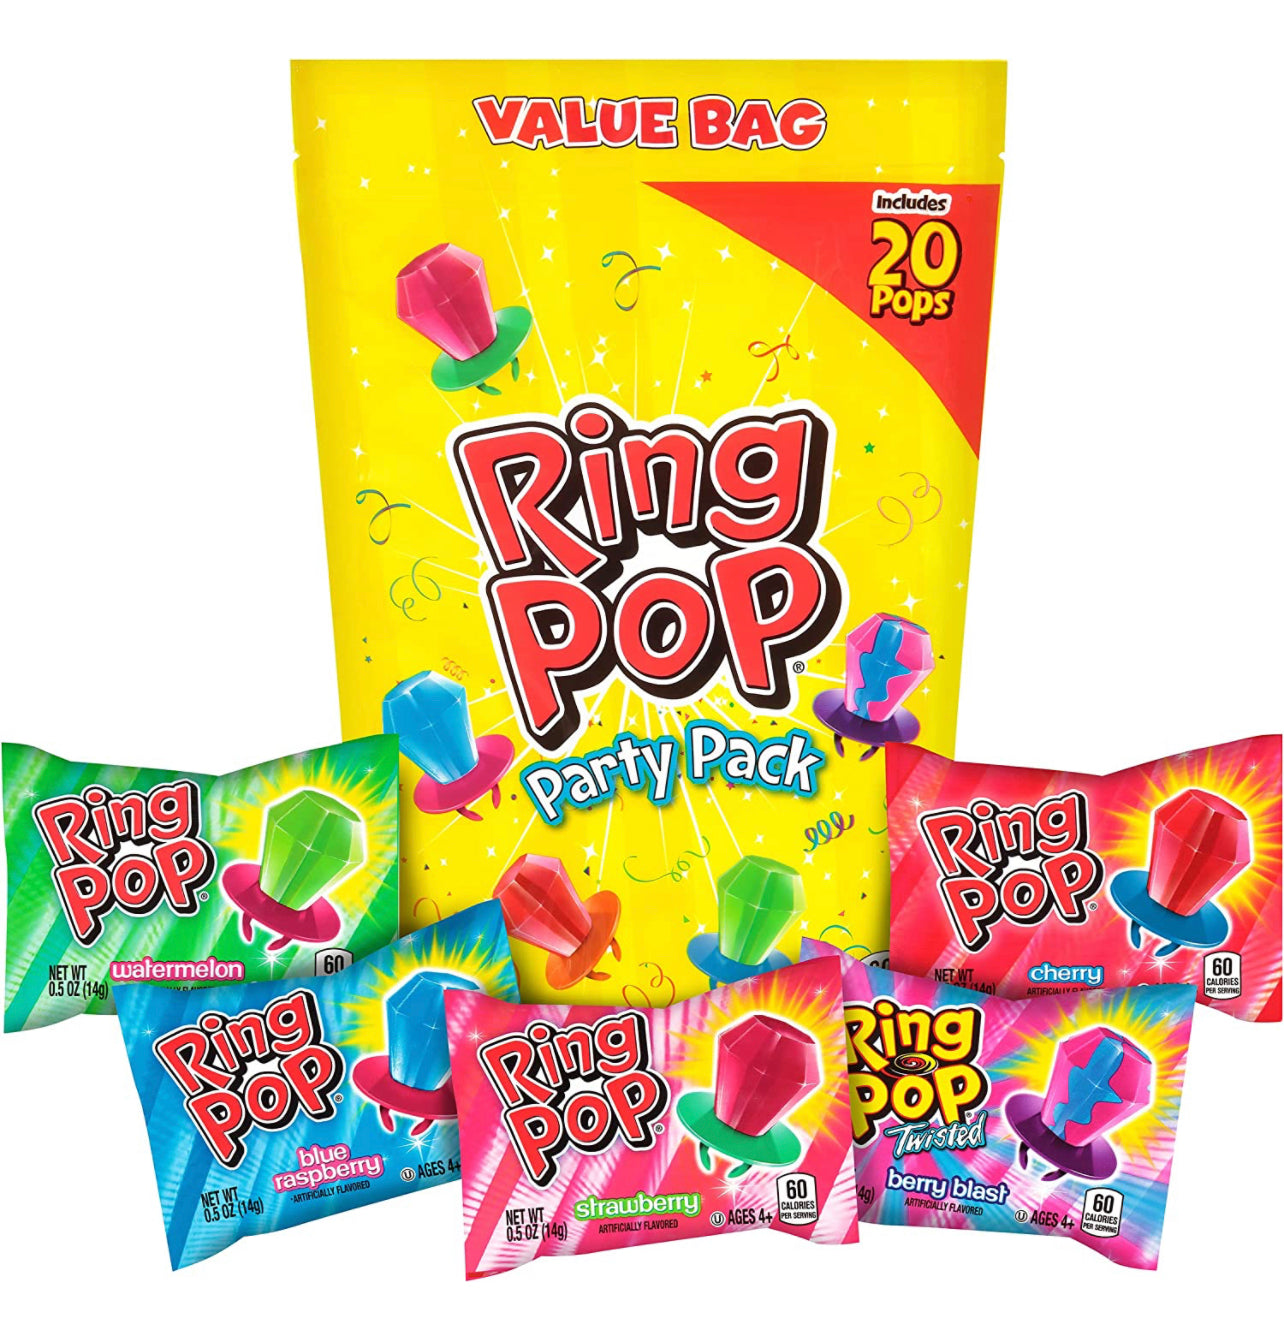 Ring Pop Individually Wrapped Bulk Lollipop Variety Party Pack, 20 Count Lollipop Suckers w/ Assorted Flavors